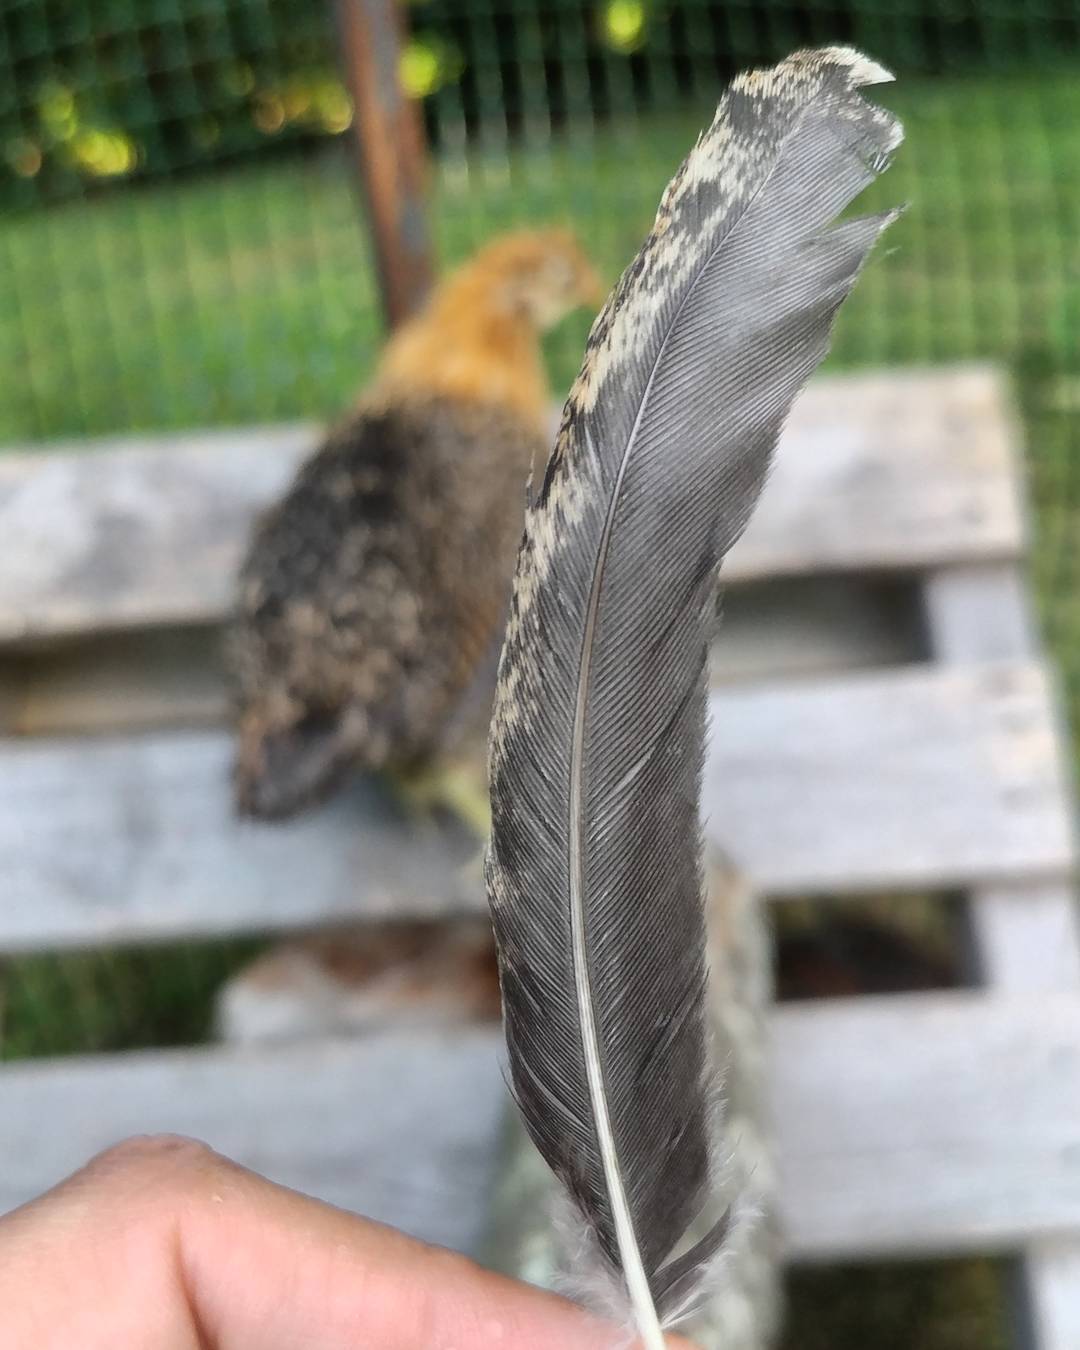 Are baby feathers a thing? One of my 5 week old chicks just dropped this from her wing. She's only had it 4 weeks! Making room for bigger and better feathers?